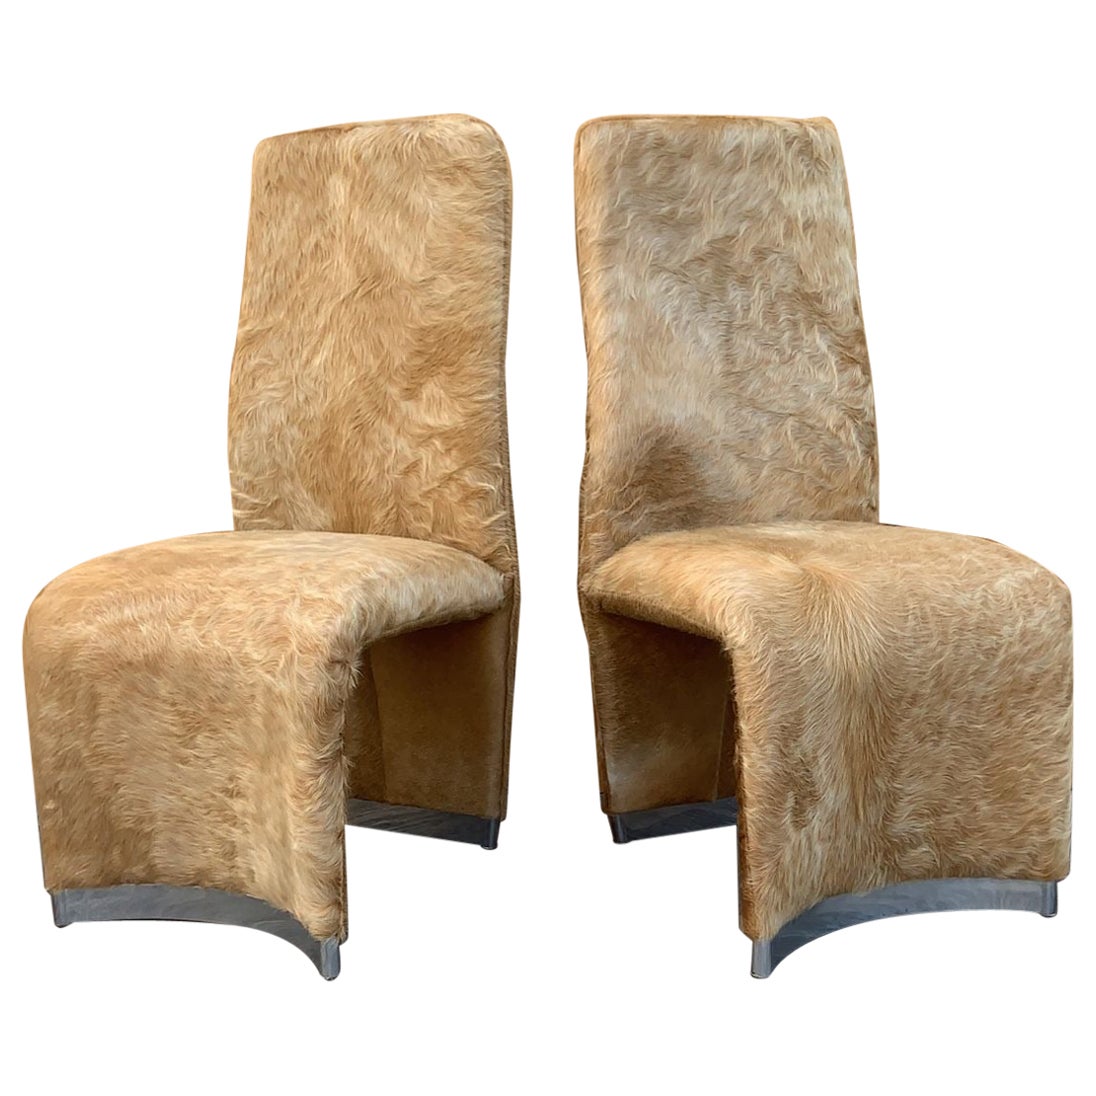 Post Modern DIA Ribbon Side Chairs with Chrome Base Trim In Cream Cowhide - Pair